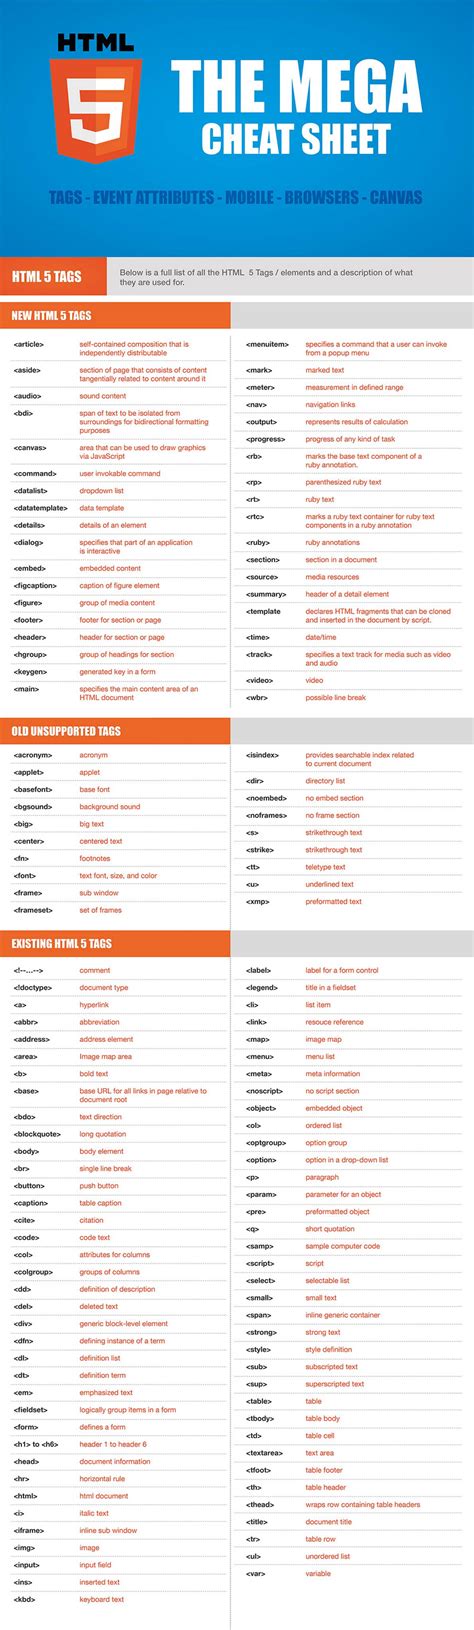 Learn Html5 Basics With This Epic Cheat Sheet Cheat Sheets Html5 Basic